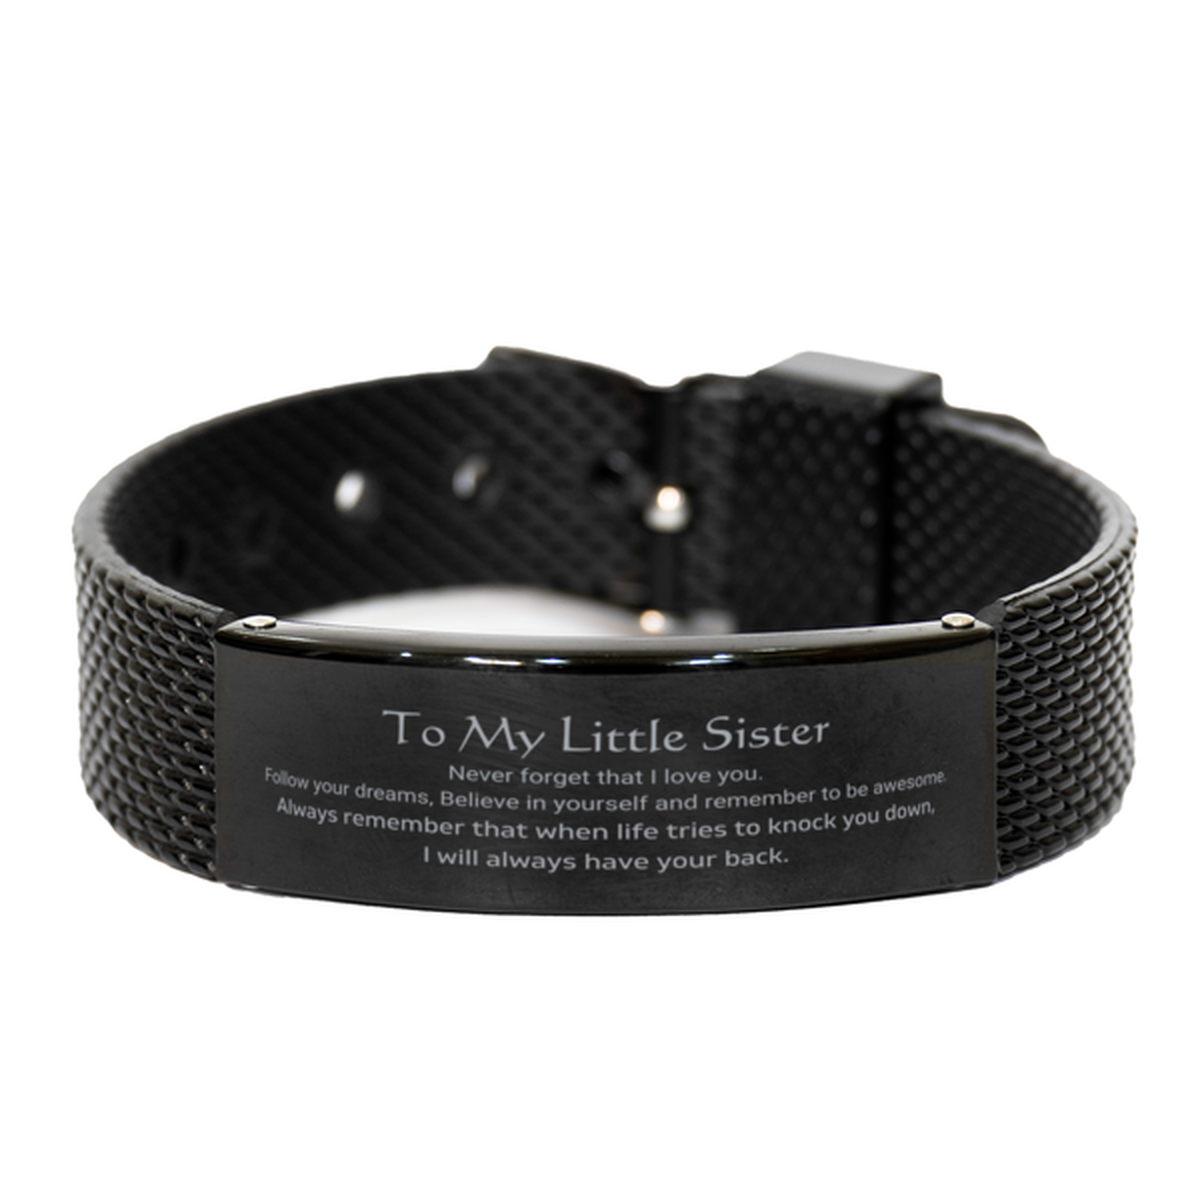 Inspirational Gifts for Little Sister, Follow your dreams, Believe in yourself, Little Sister Black Shark Mesh Bracelet, Birthday Christmas Unique Gifts For Little Sister